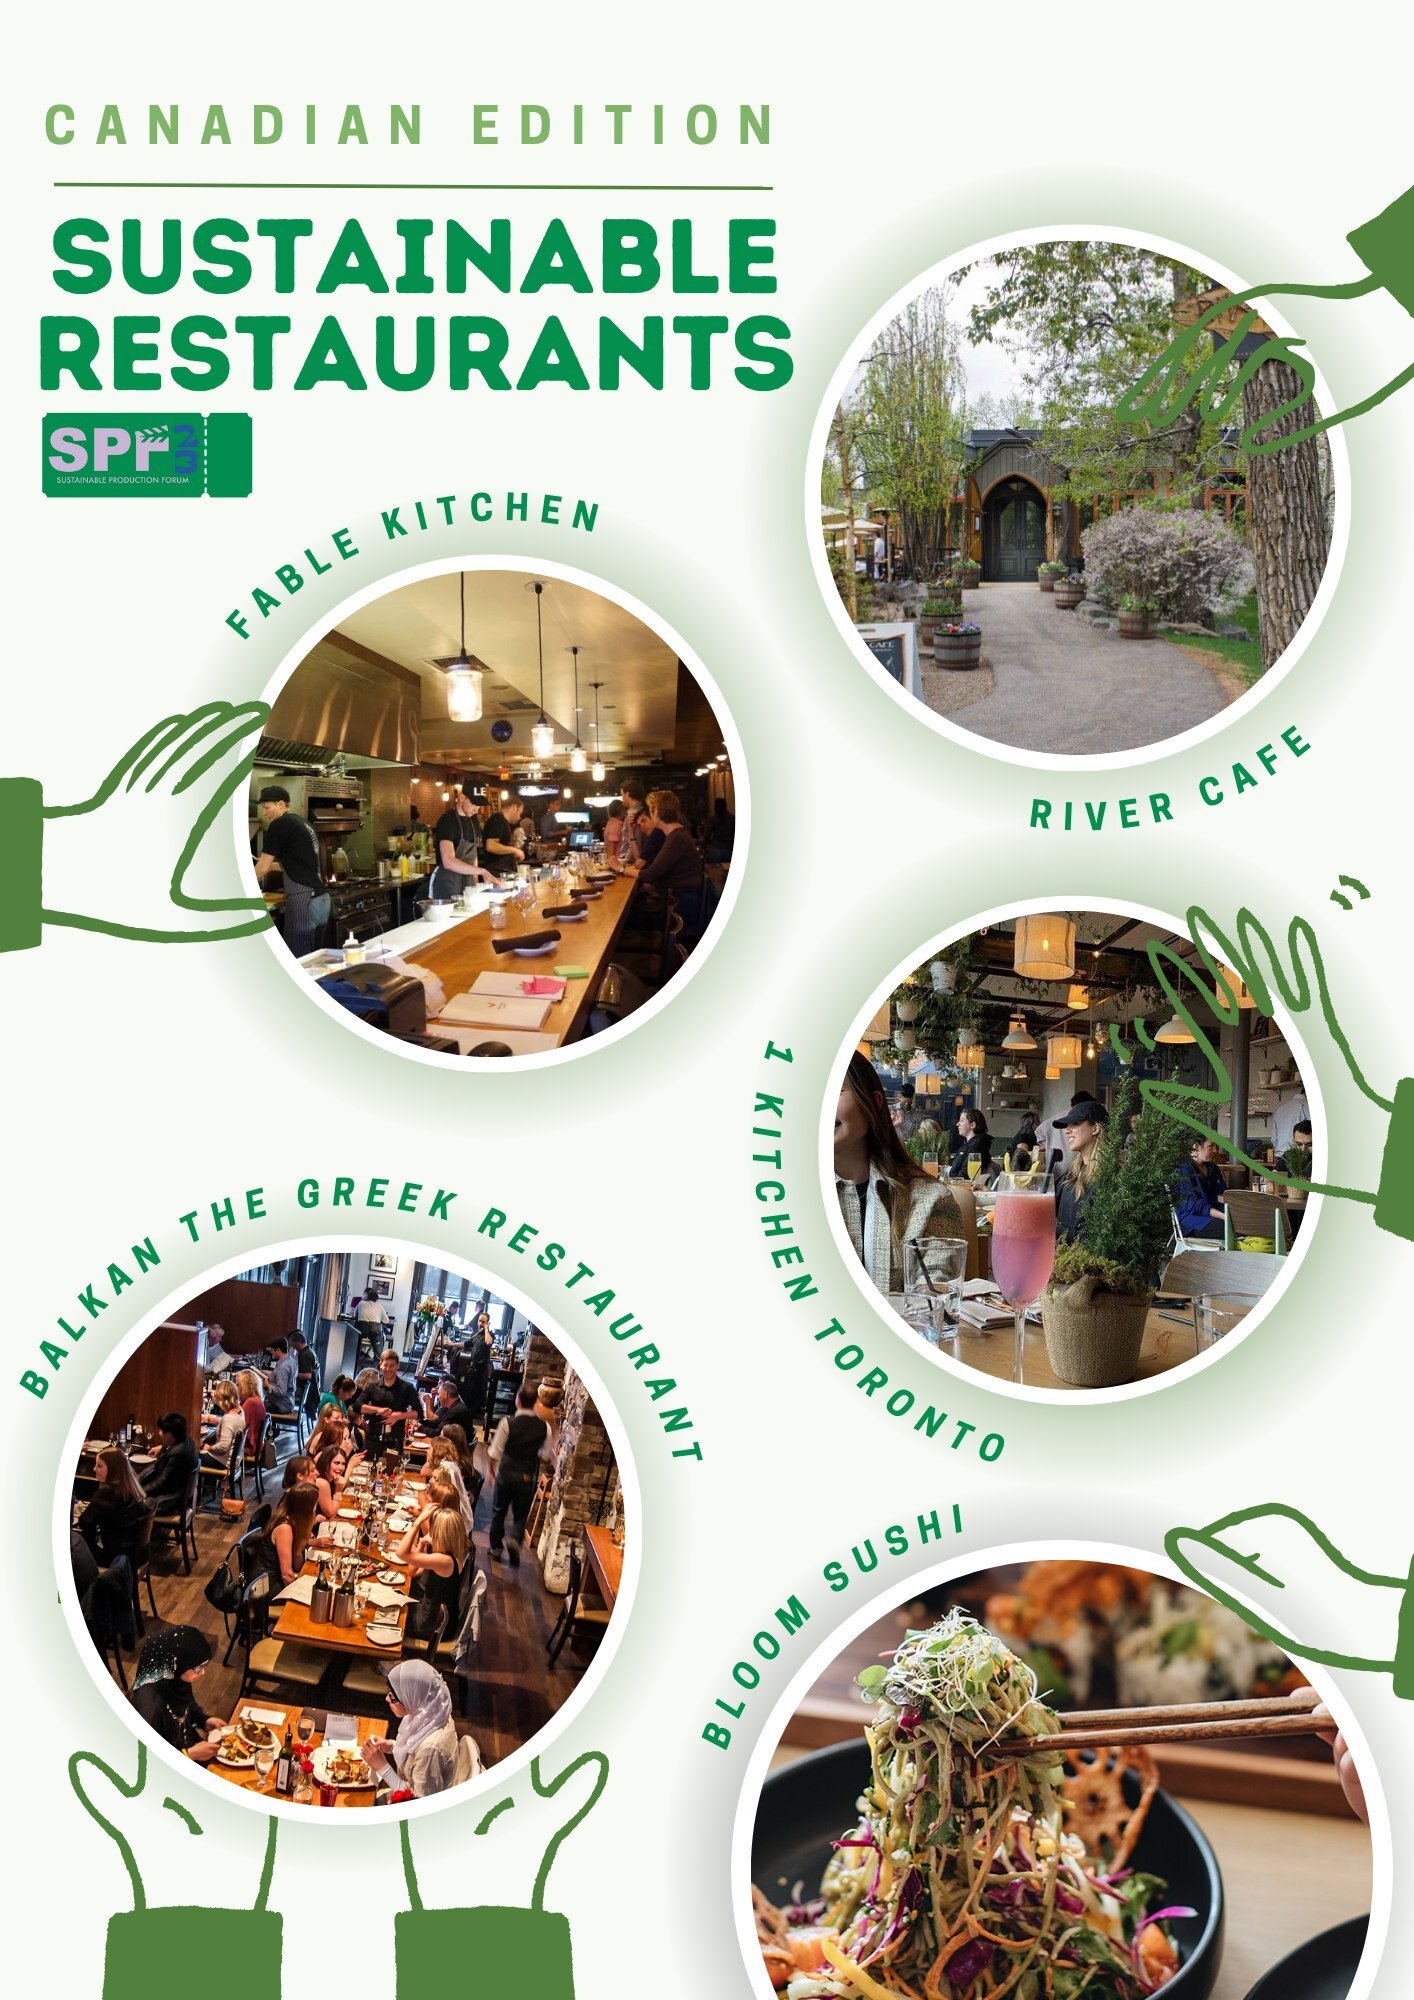 When it comes to #sustainability, the places you choose to eat make a difference 🍴

Whether you&rsquo;re grabbing lunch between shoots or attending one of our in-person conferences, these 5 Canadian restaurants are leading the way on green dining fr